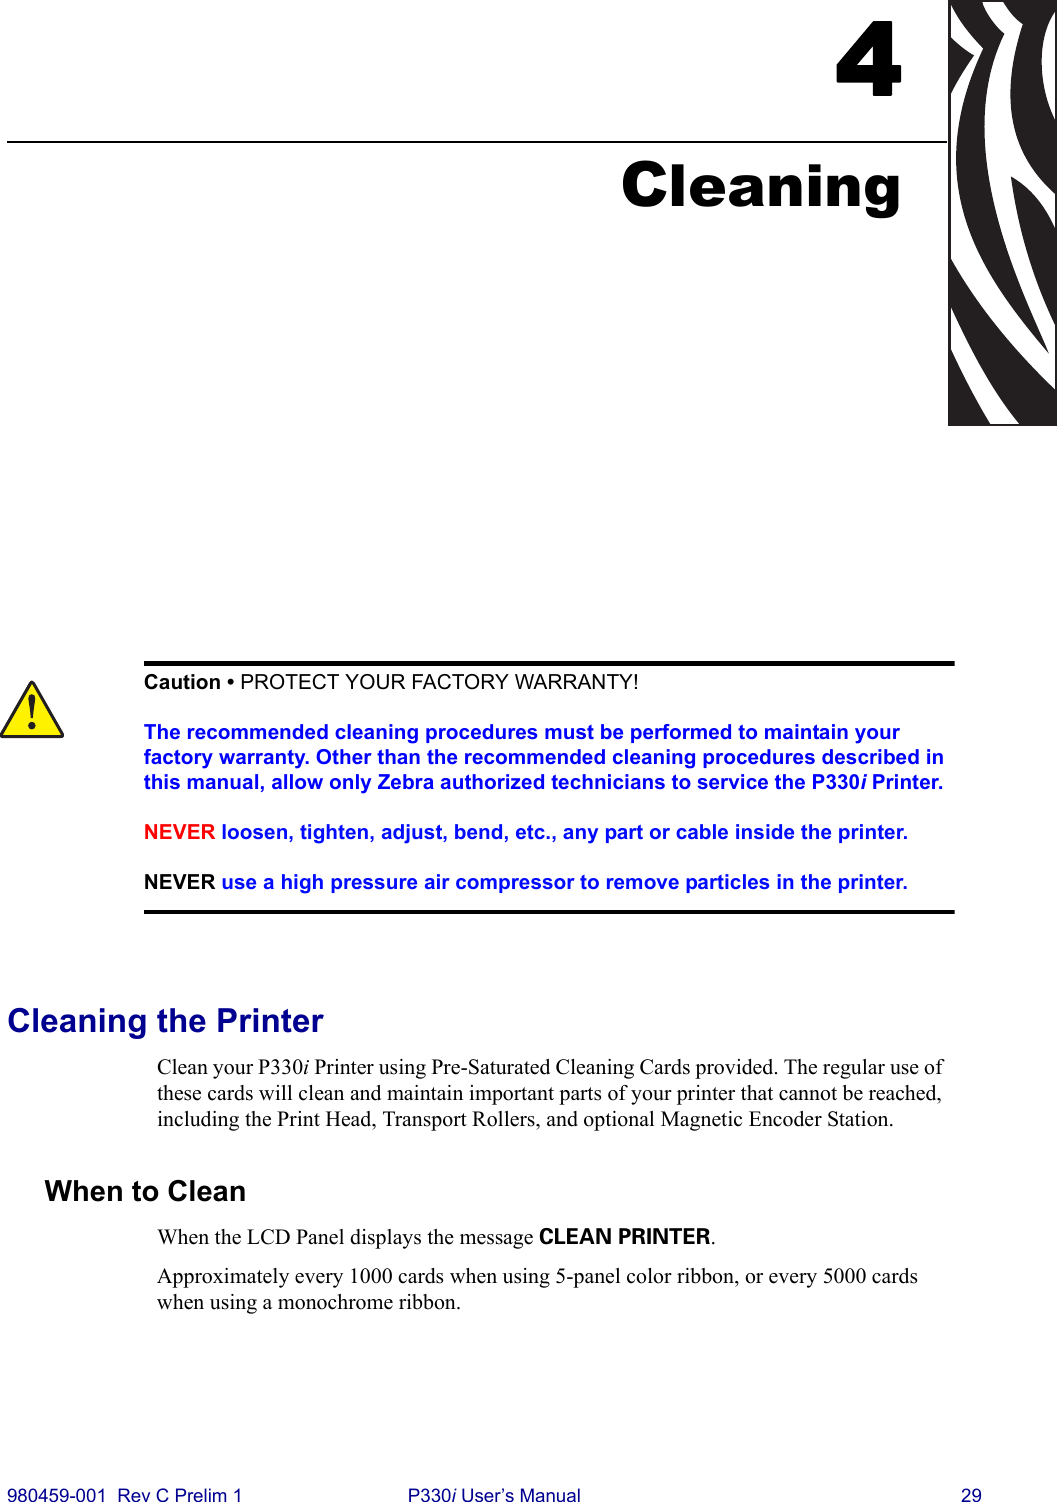 980459-001  Rev C Prelim 1 P330i User’s Manual 294CleaningCleaning the PrinterClean your P330i Printer using Pre-Saturated Cleaning Cards provided. The regular use of these cards will clean and maintain important parts of your printer that cannot be reached, including the Print Head, Transport Rollers, and optional Magnetic Encoder Station.When to CleanWhen the LCD Panel displays the message CLEAN PRINTER.Approximately every 1000 cards when using 5-panel color ribbon, or every 5000 cards when using a monochrome ribbon.Caution • PROTECT YOUR FACTORY WARRANTY!The recommended cleaning procedures must be performed to maintain your factory warranty. Other than the recommended cleaning procedures described in this manual, allow only Zebra authorized technicians to service the P330i Printer.NEVER loosen, tighten, adjust, bend, etc., any part or cable inside the printer.NEVER use a high pressure air compressor to remove particles in the printer.